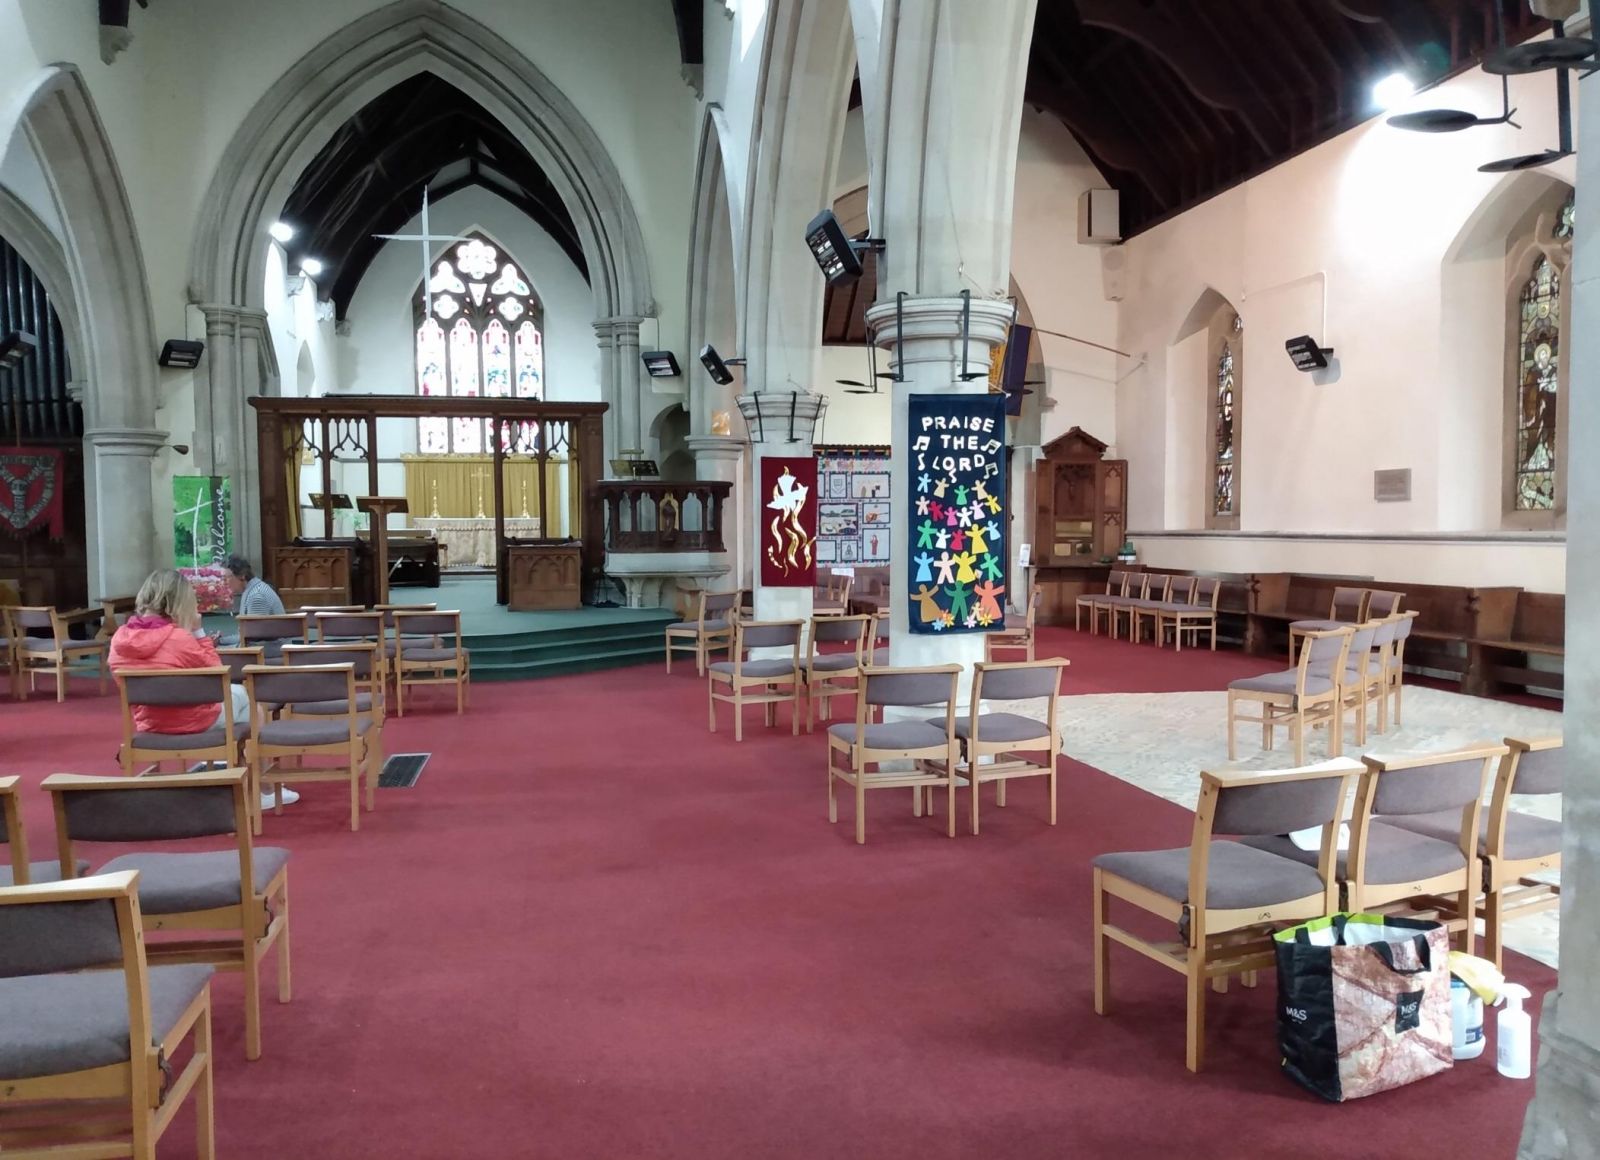 The new socially-distanced normality in Holy Trinity church